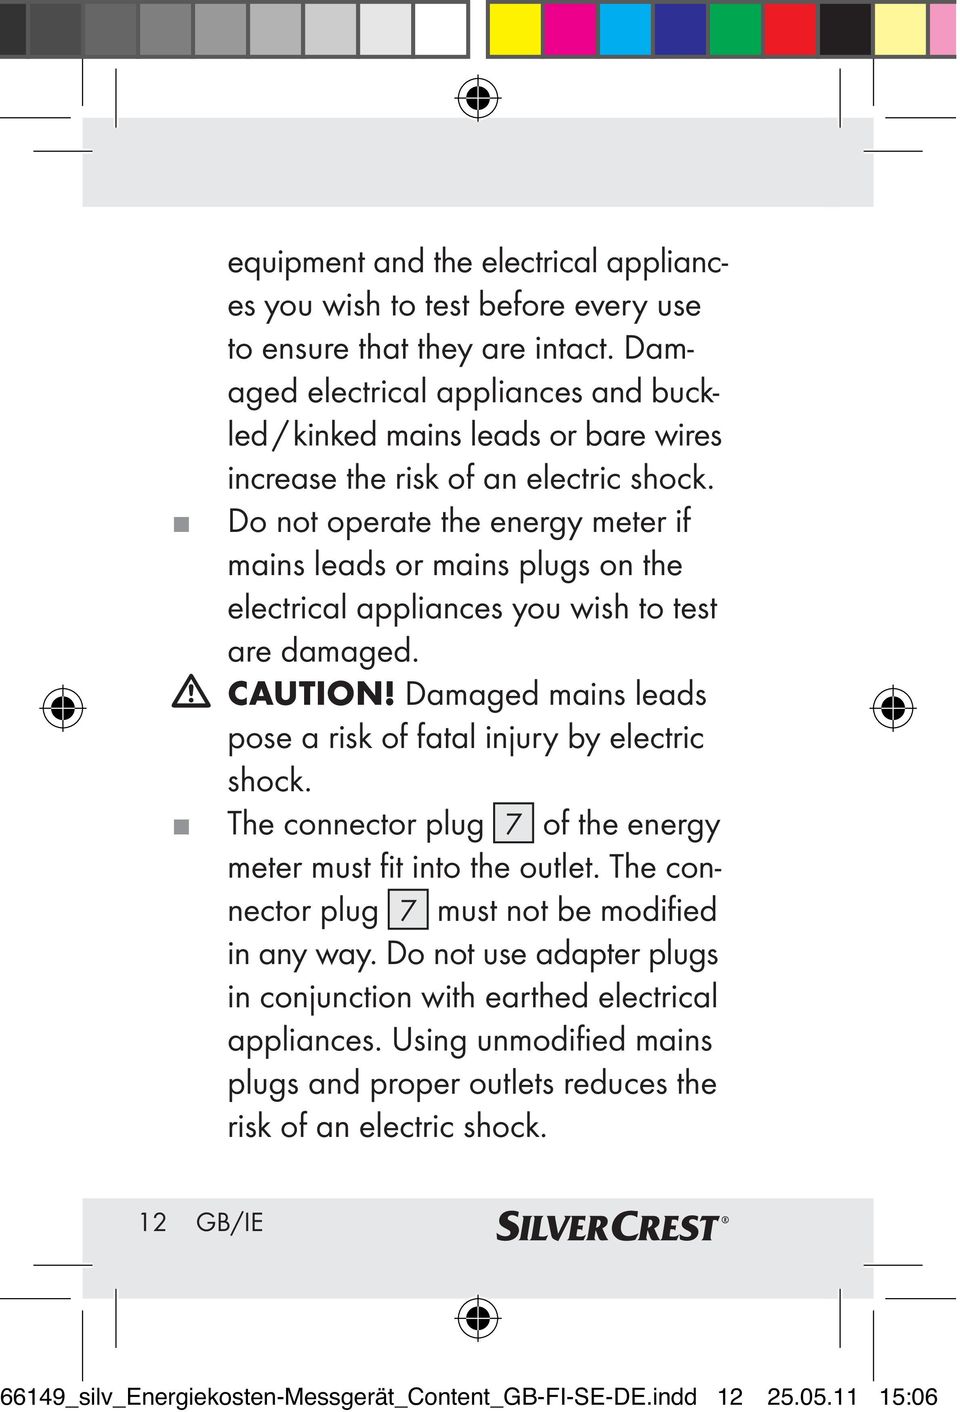 Do not operate the energy meter if mains leads or mains plugs on the electrical appliances you wish to test are damaged. CAUTION! Damaged mains leads pose a risk of fatal injury by electric shock.